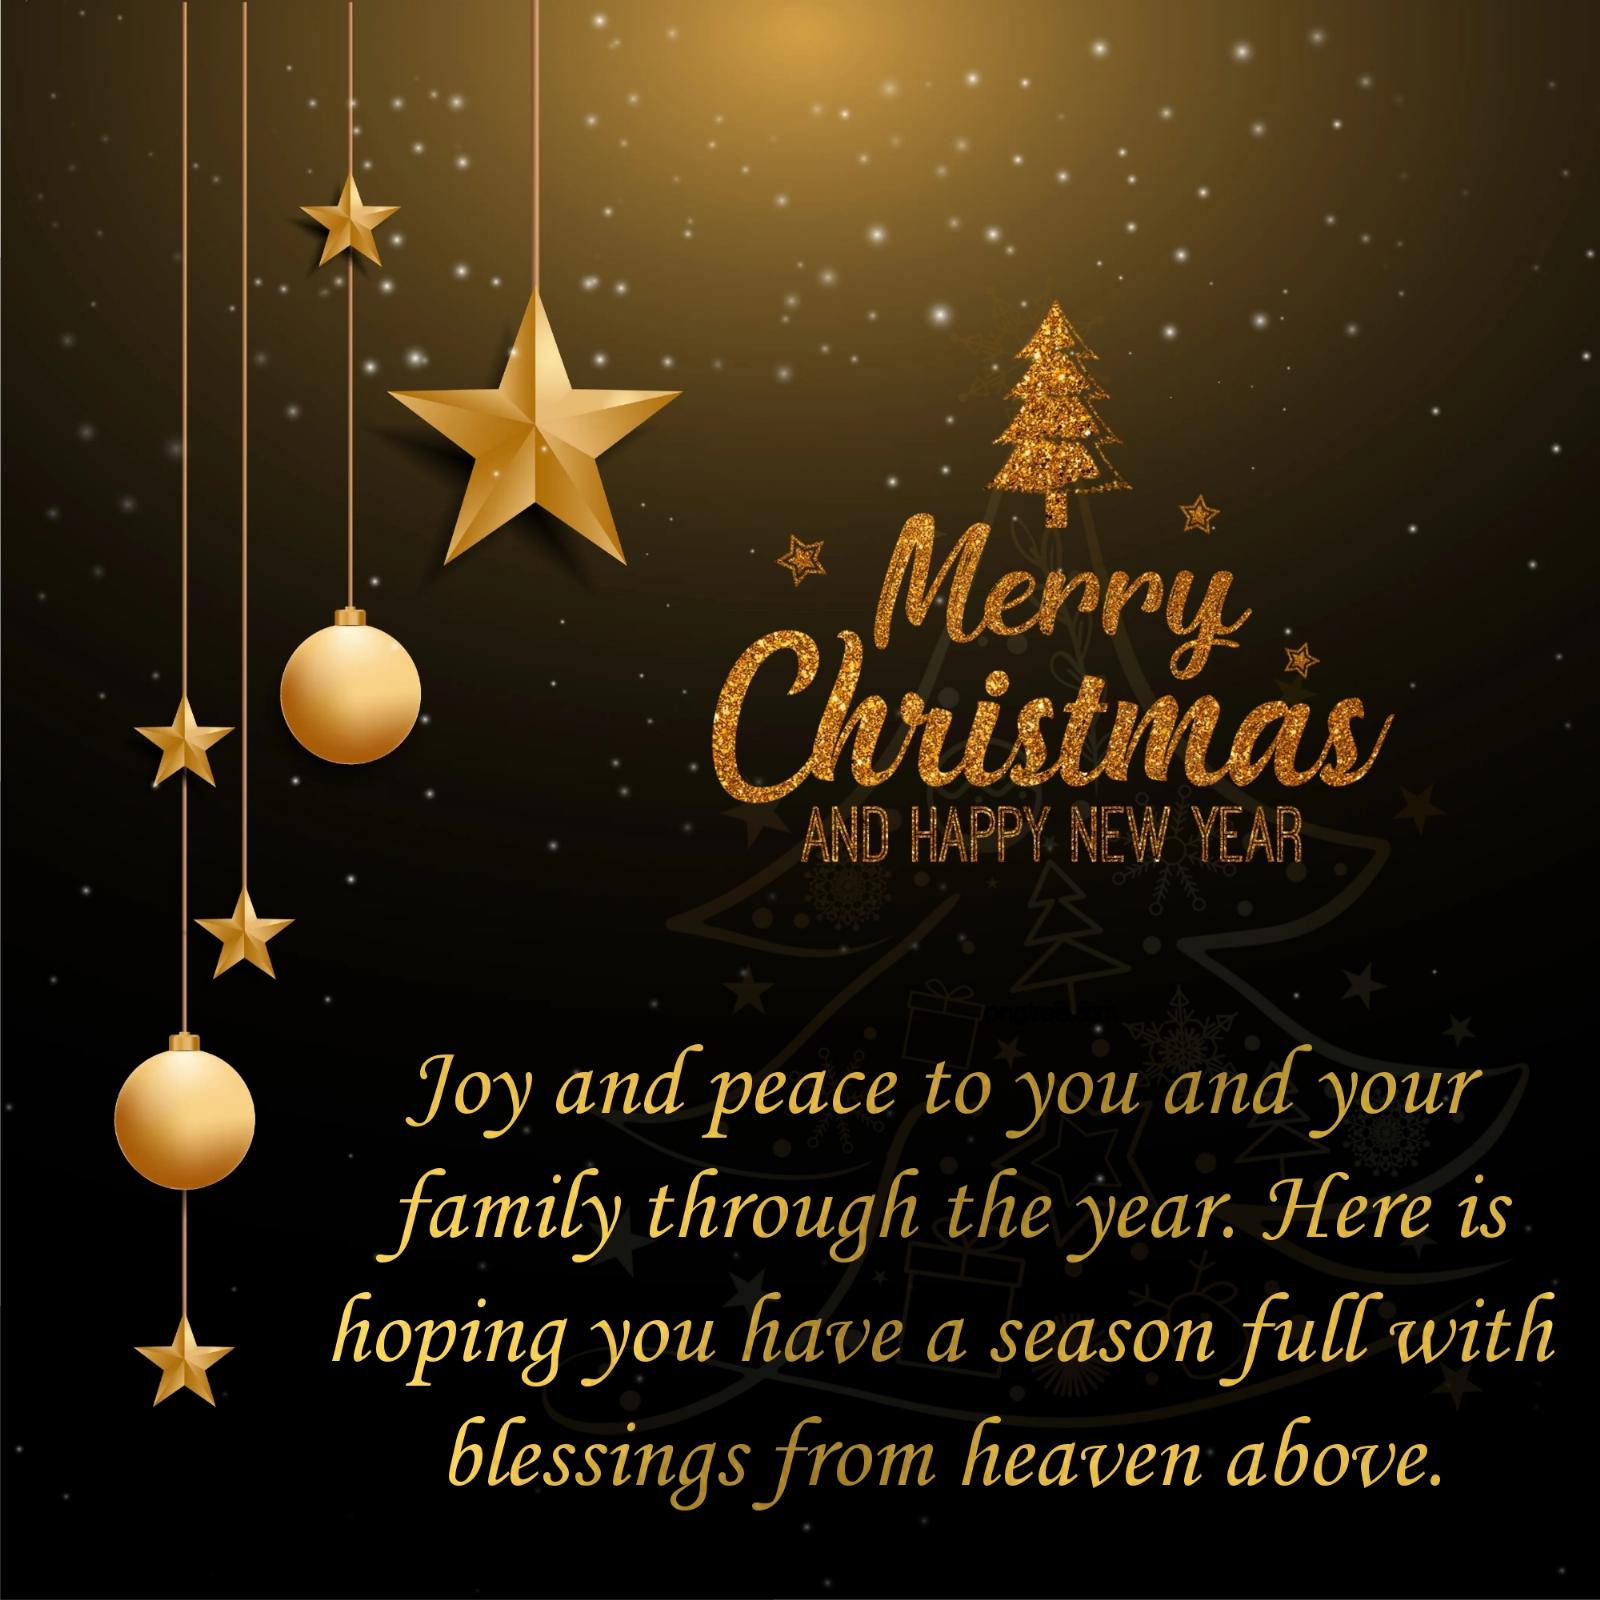 Joy and peace to you and your family through the year